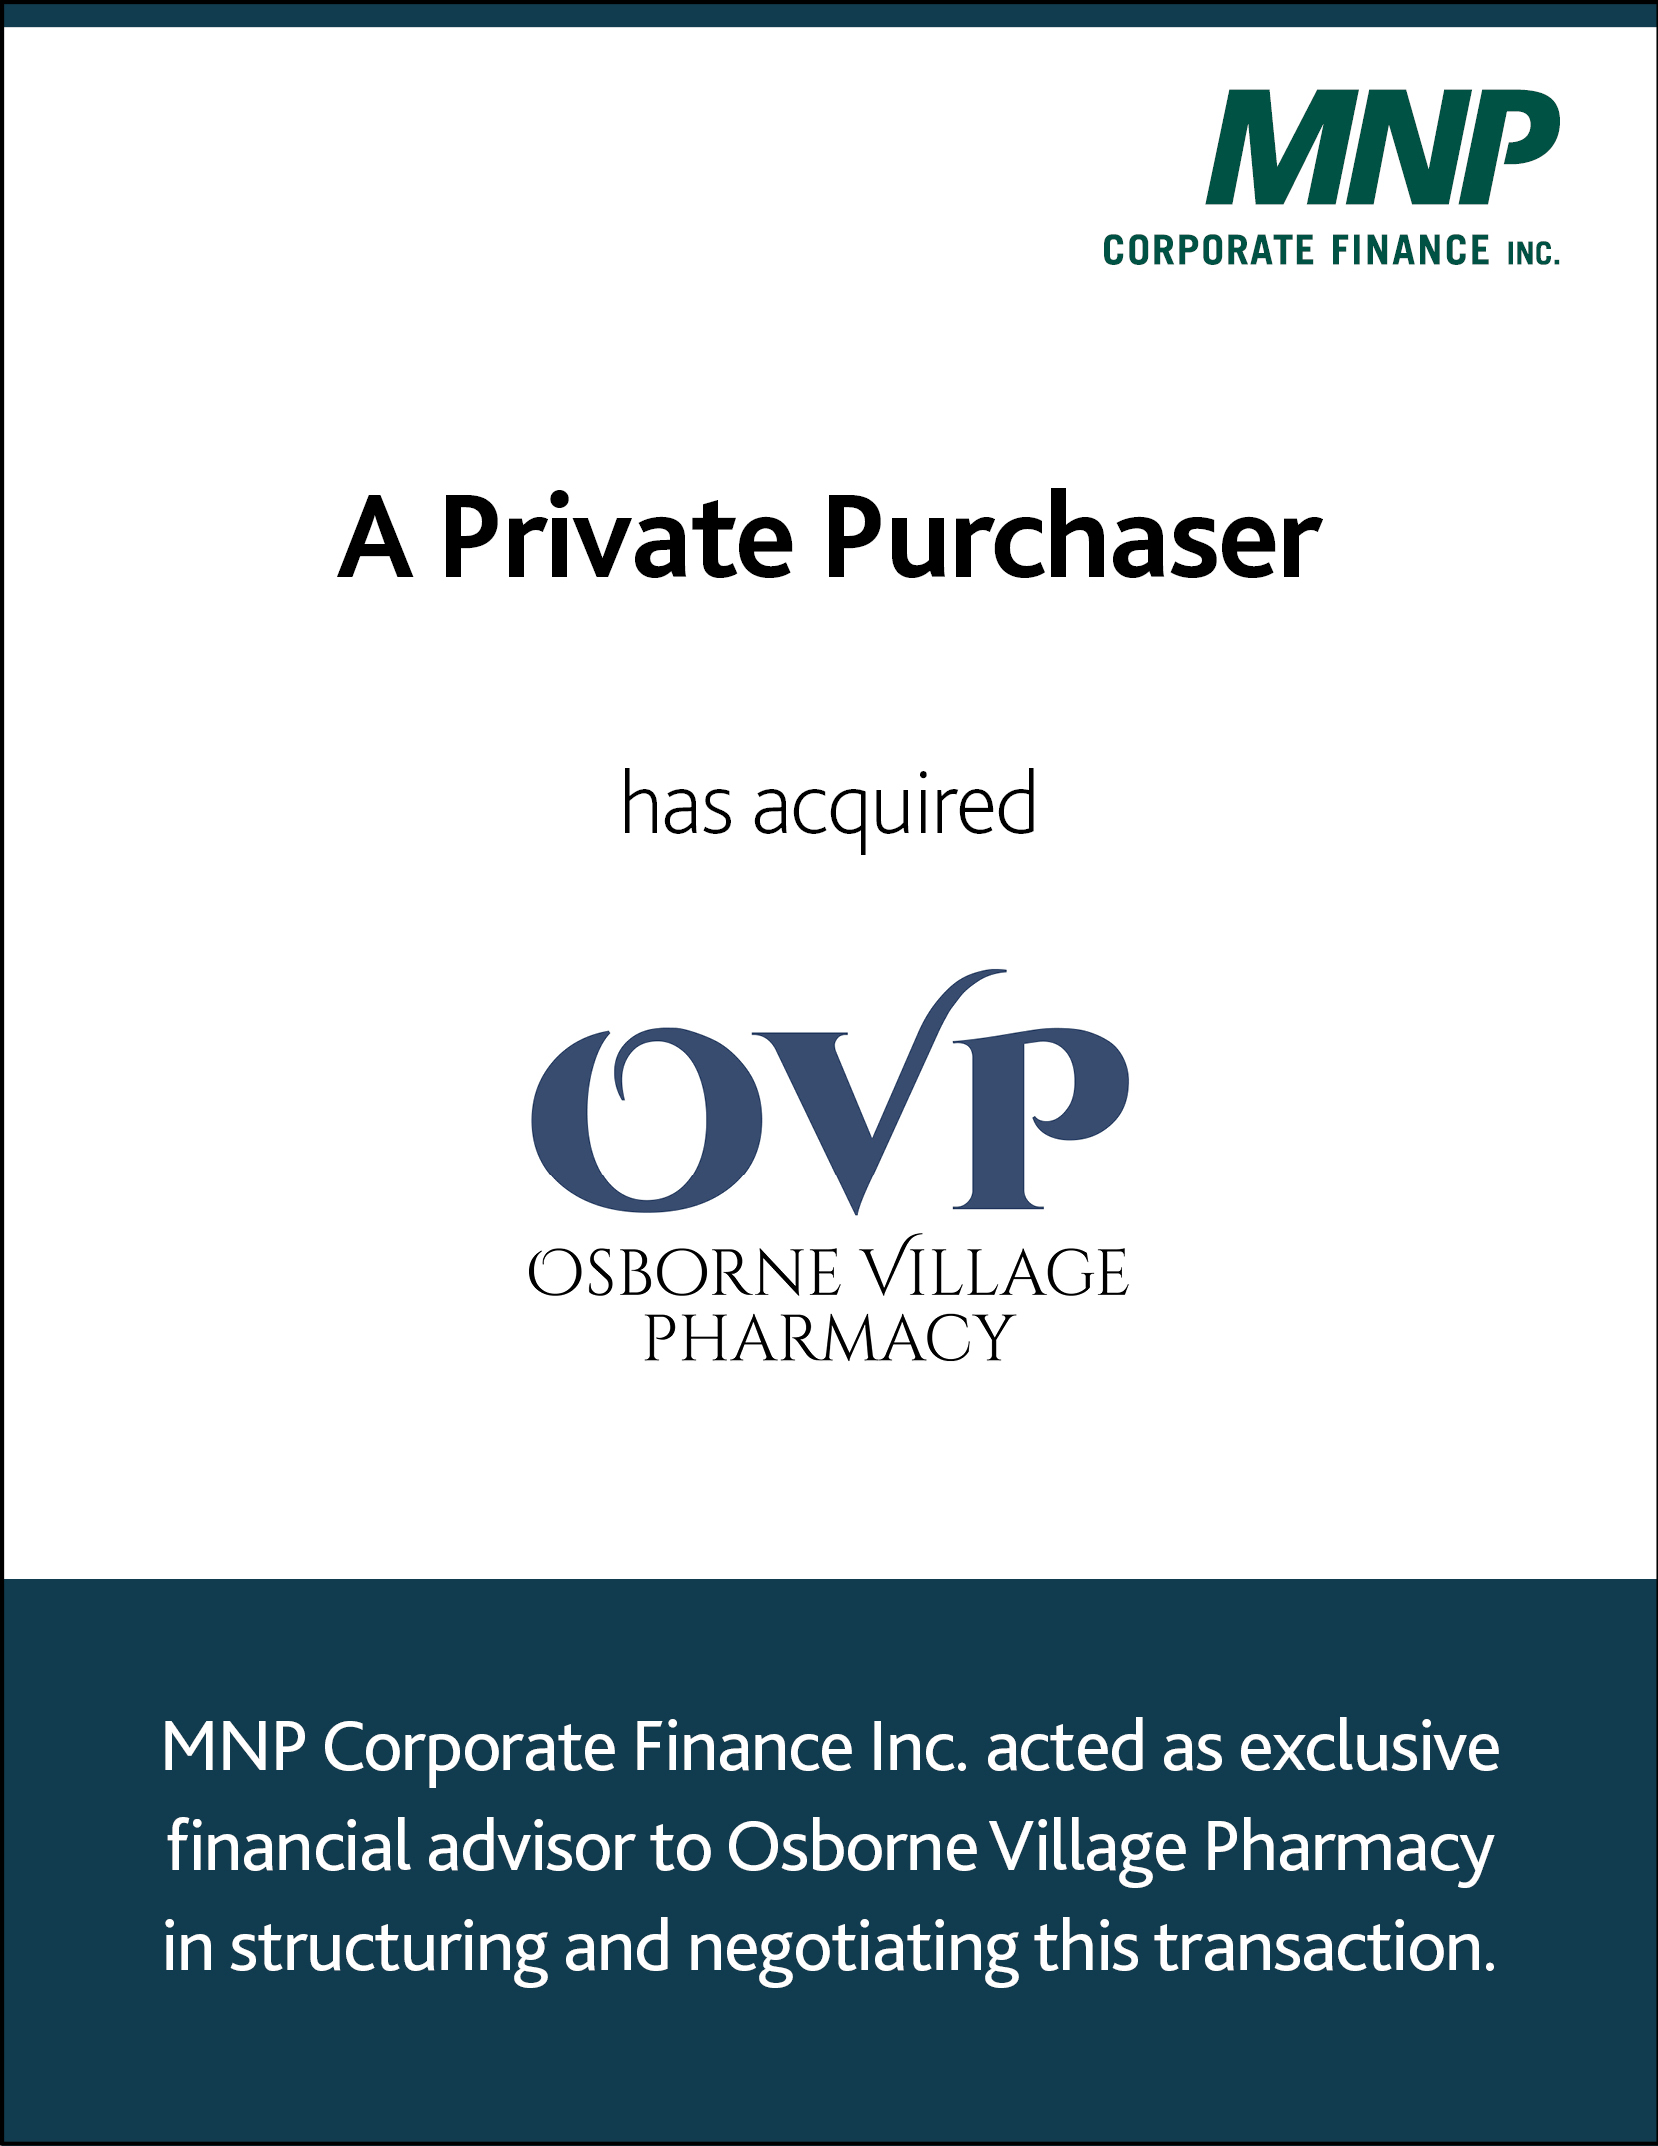 A private purchaser has acquired Osborne Village Pharmacy.